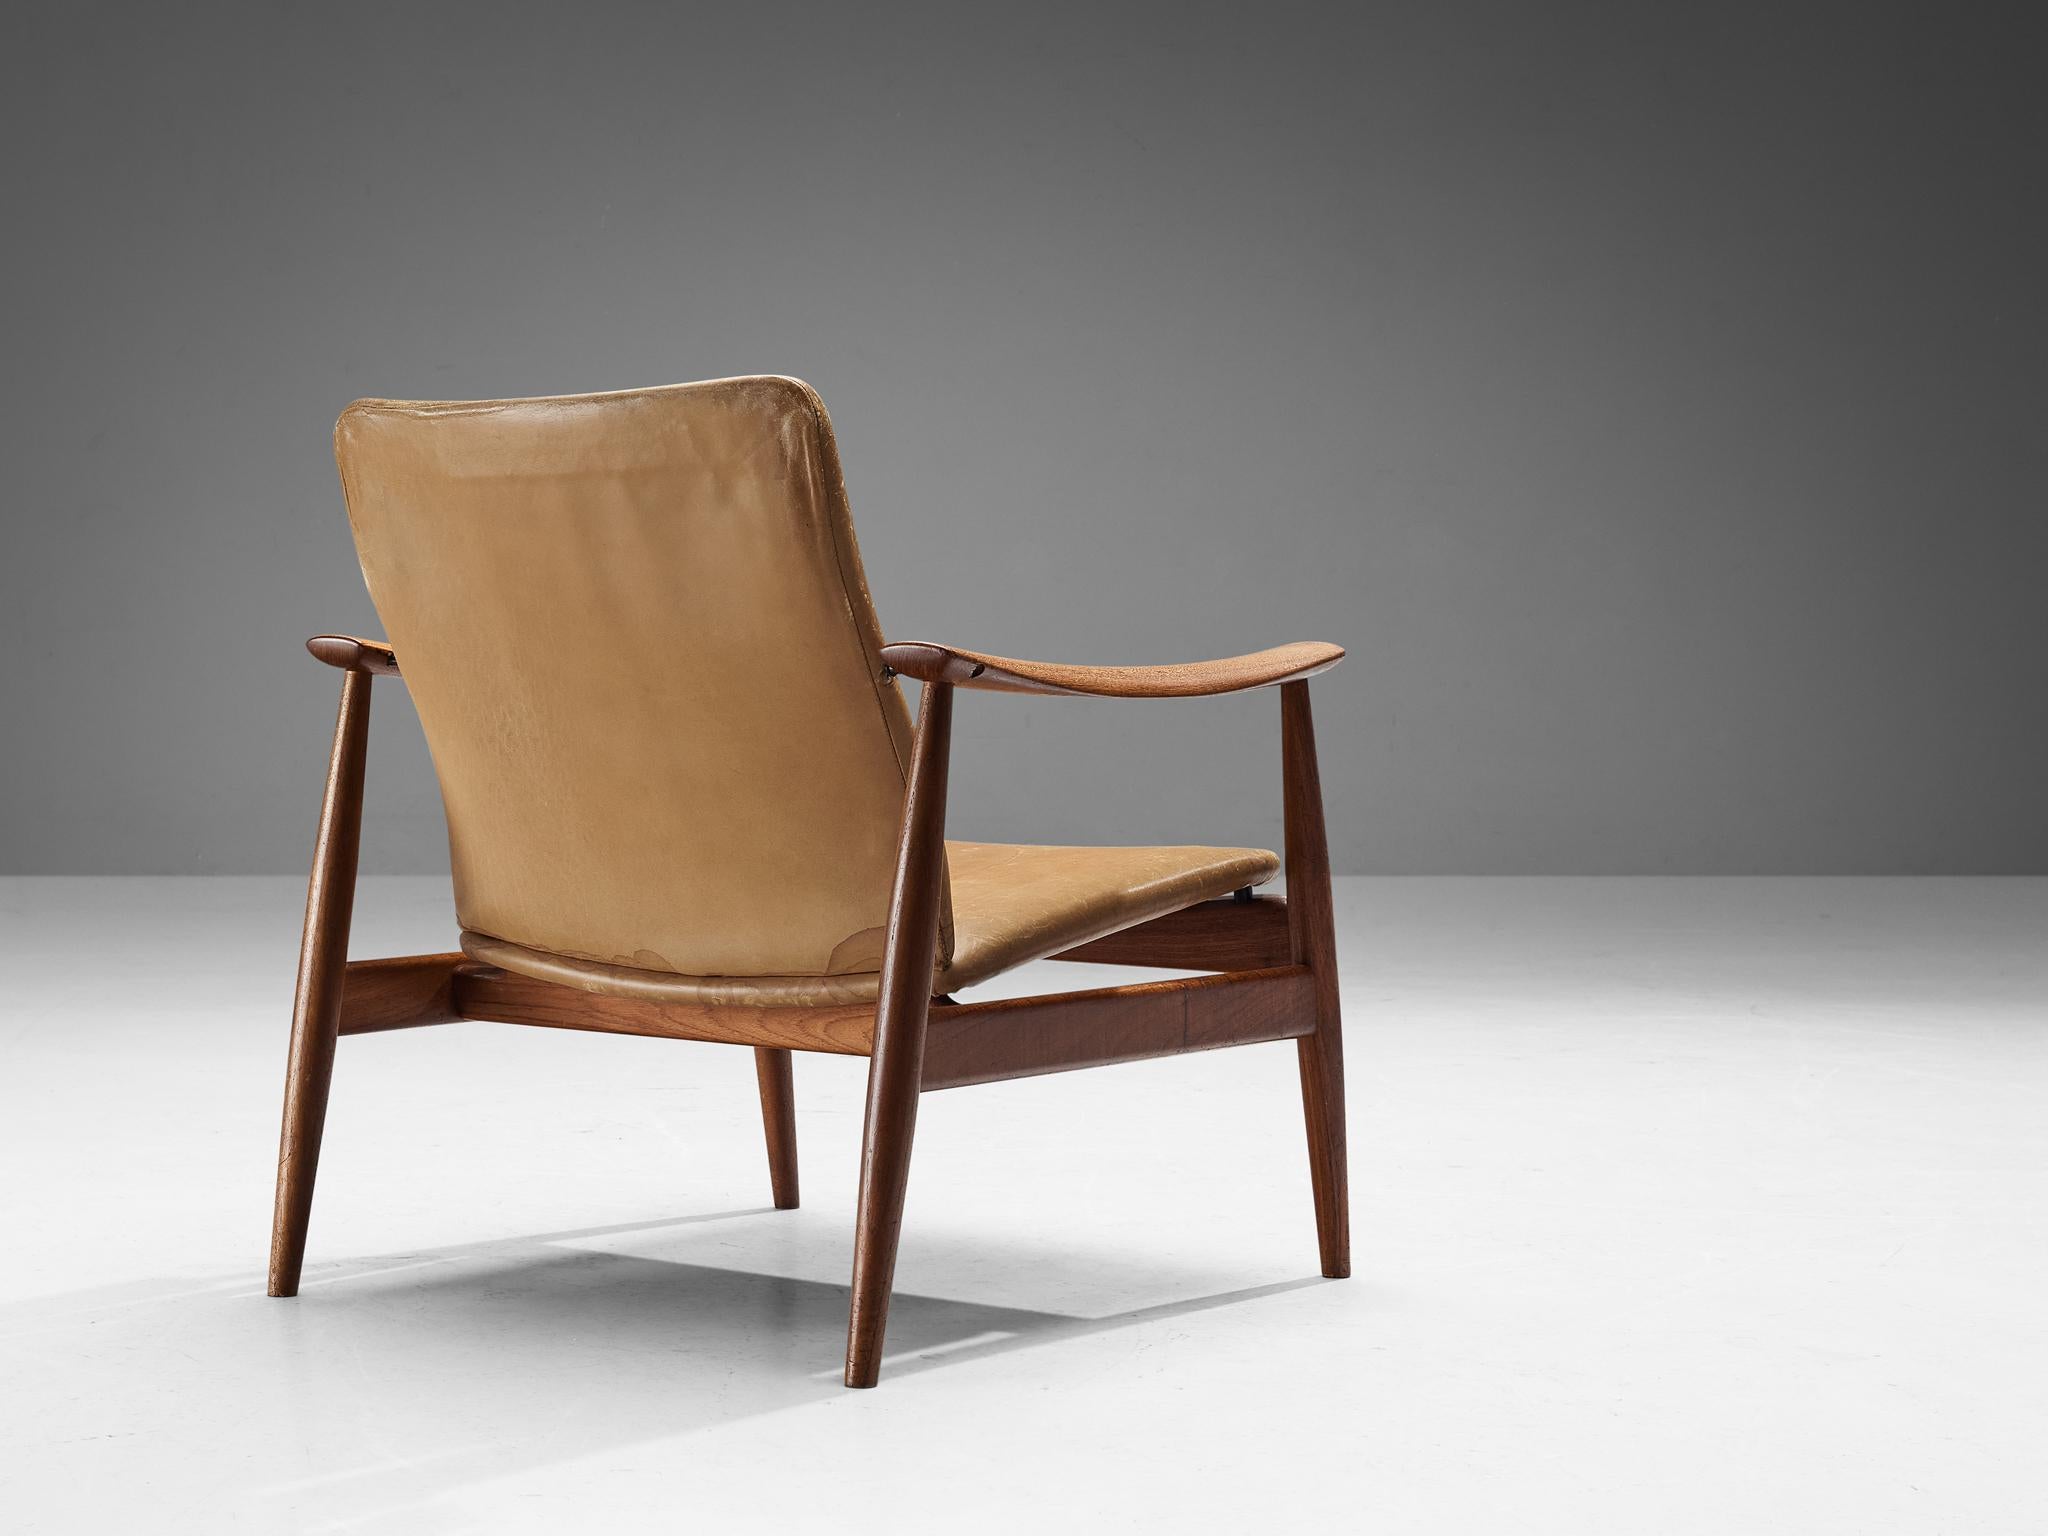 Mid-20th Century Finn Juhl for France & Søn Lounge Chair in Teak and Leather For Sale